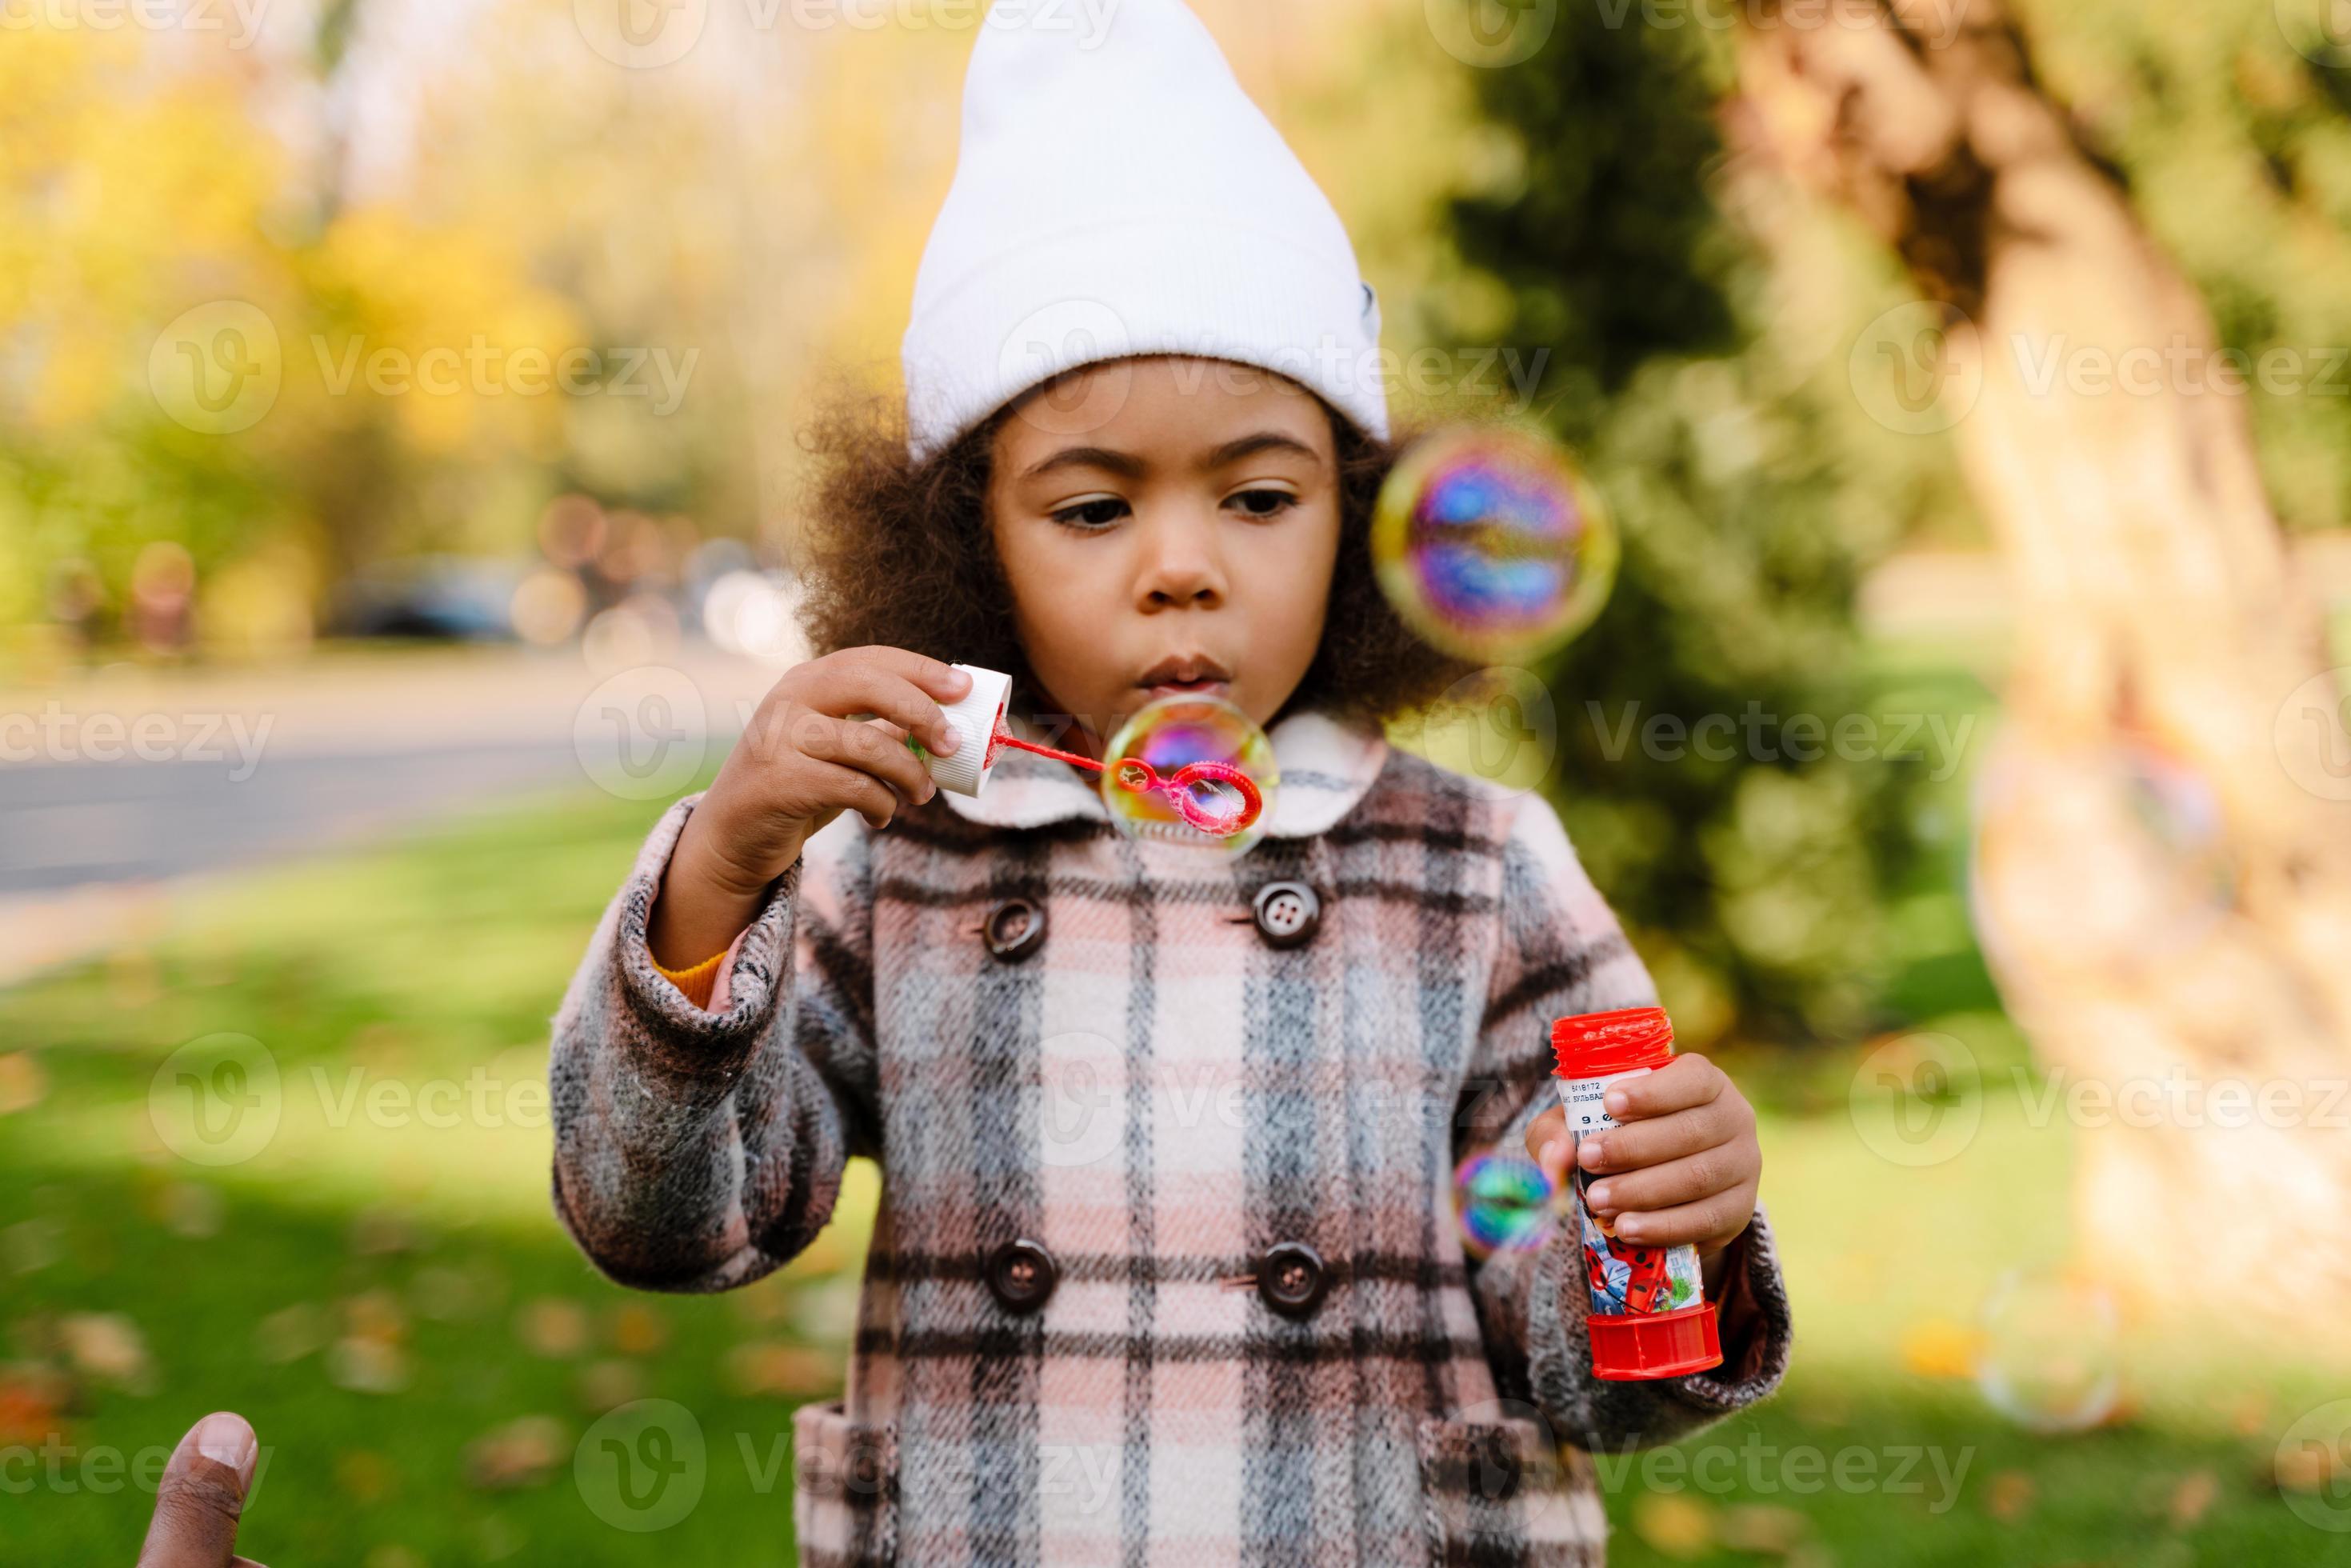 Black girl blowing soap bubbles during a walk in an autumn park photo